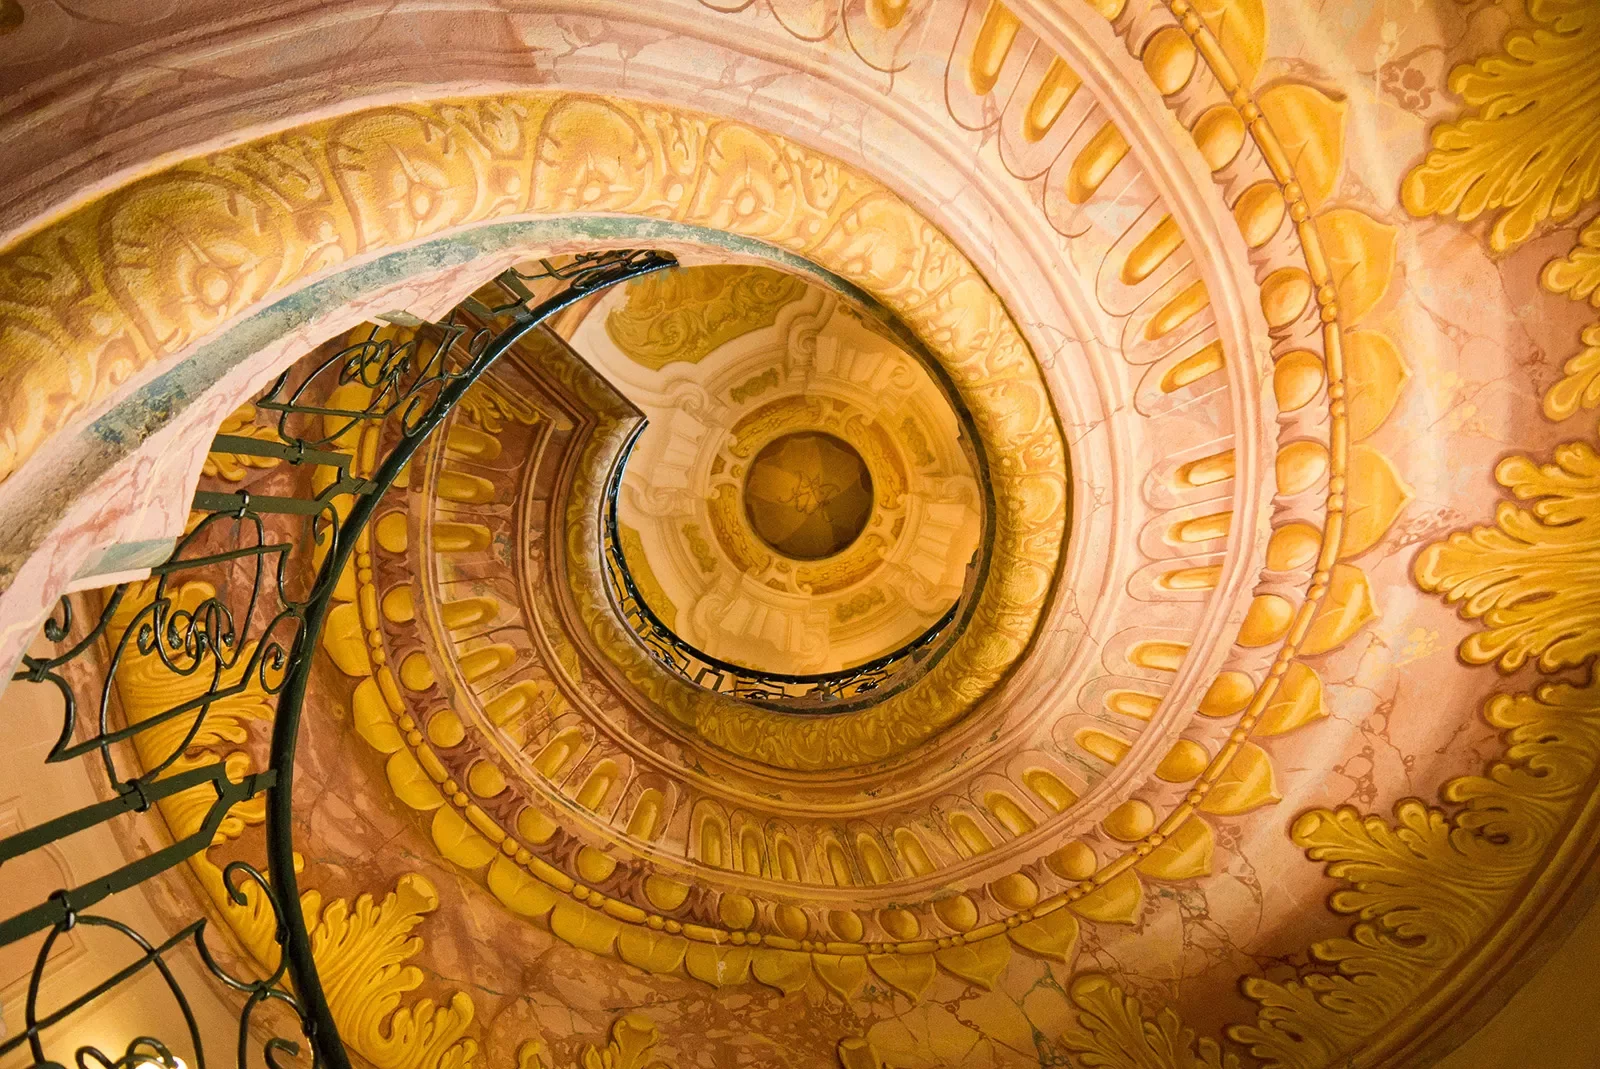 Ornate yellow and golden painted staircase spiraling to the ceiling.